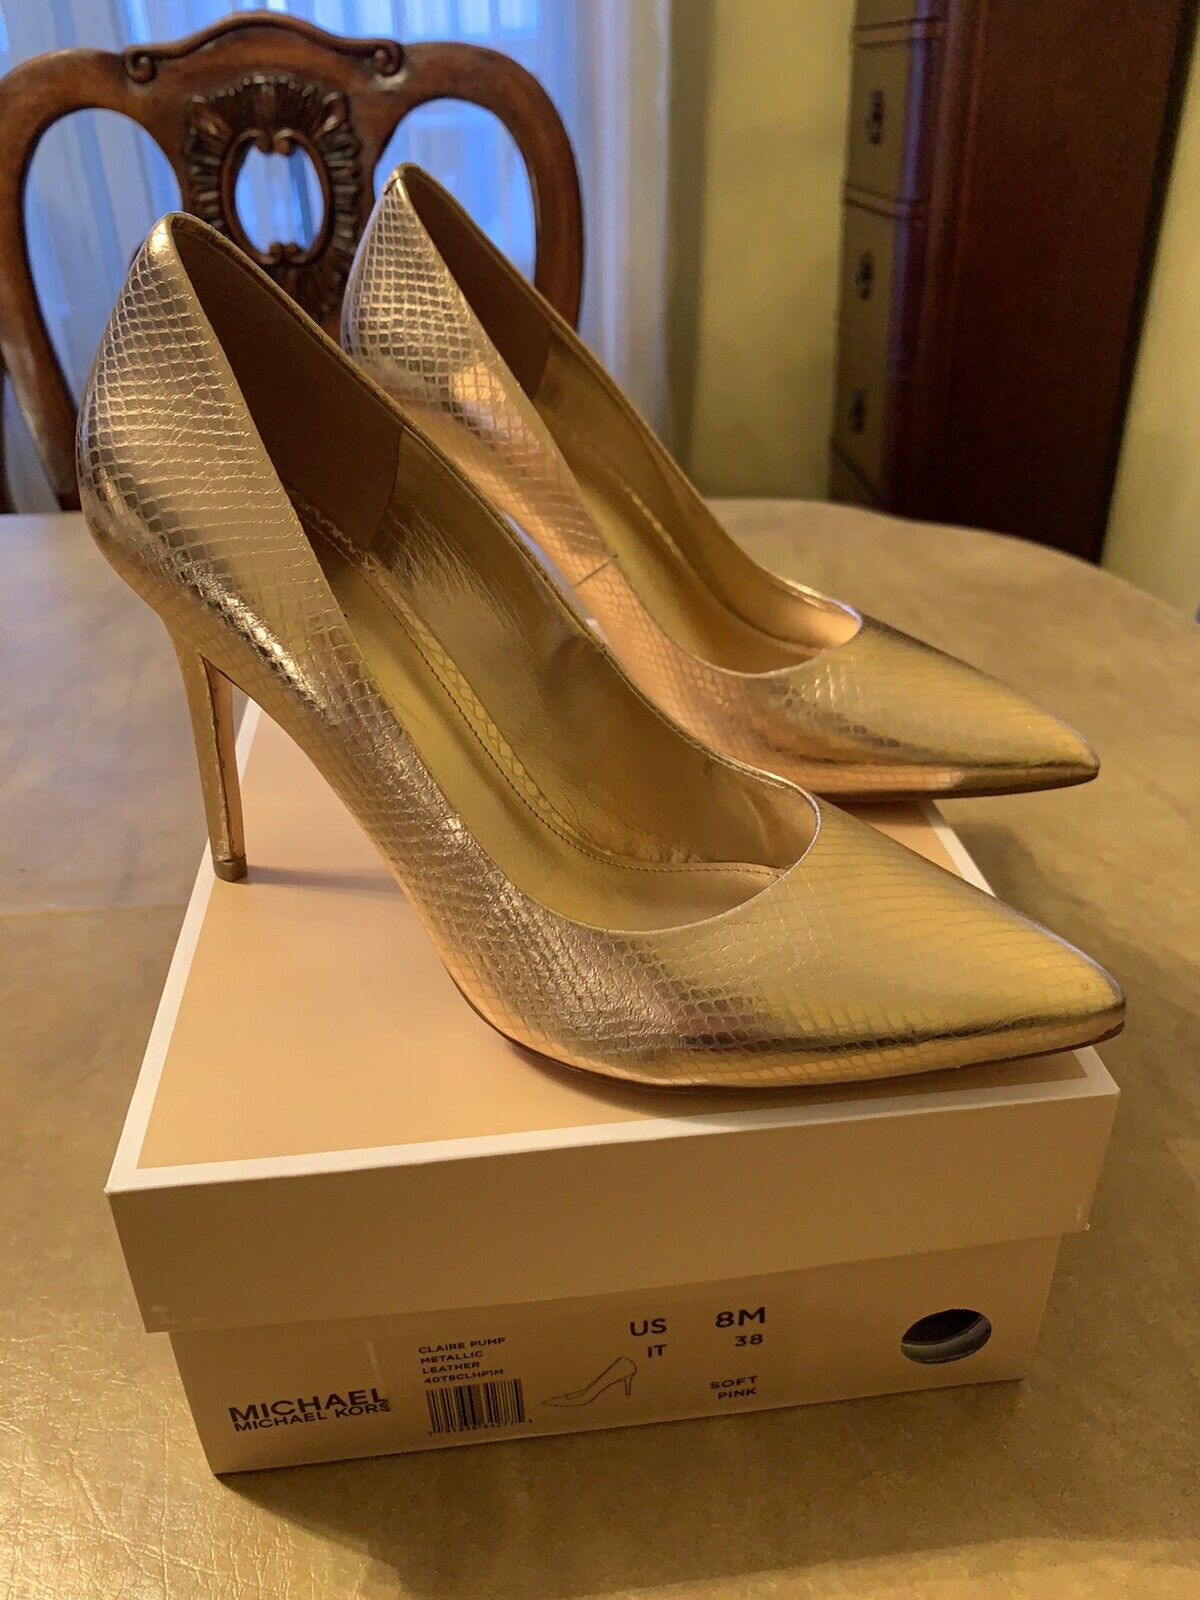 Michael Kors Claire Pumps in Soft Pink Metallic Leather (Size 8M / Brand  New) | eBay